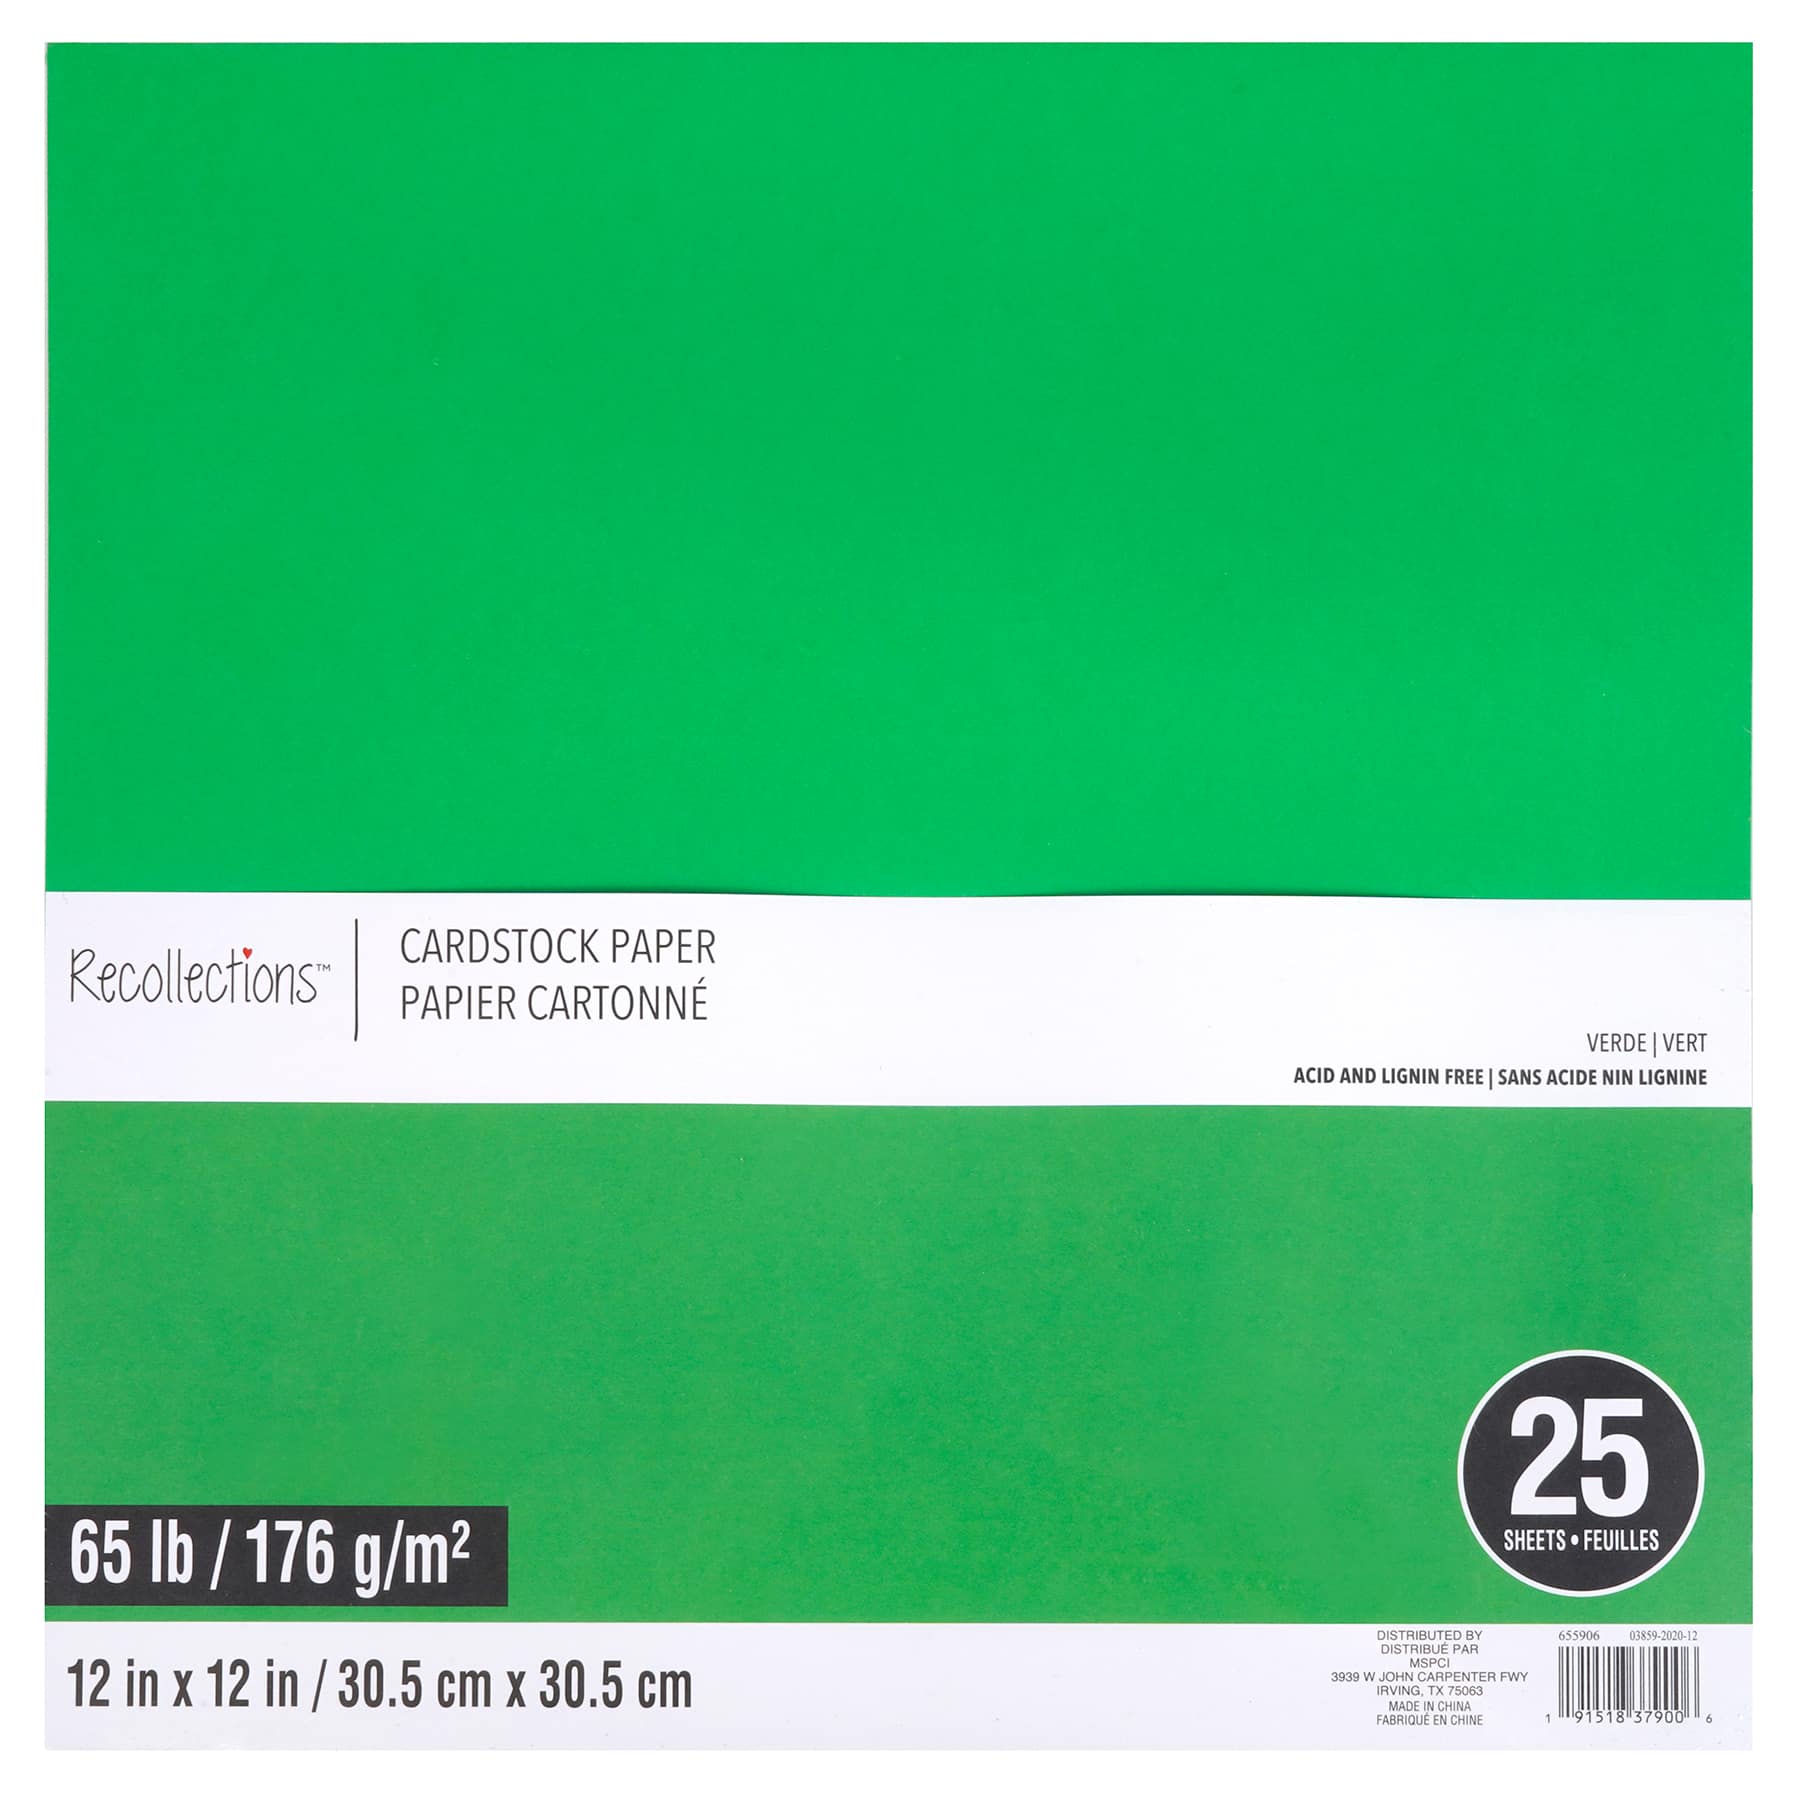 Lux 100 Lb. Cardstock Paper12 X 12teal500 Sheets/pack (1212-c-25